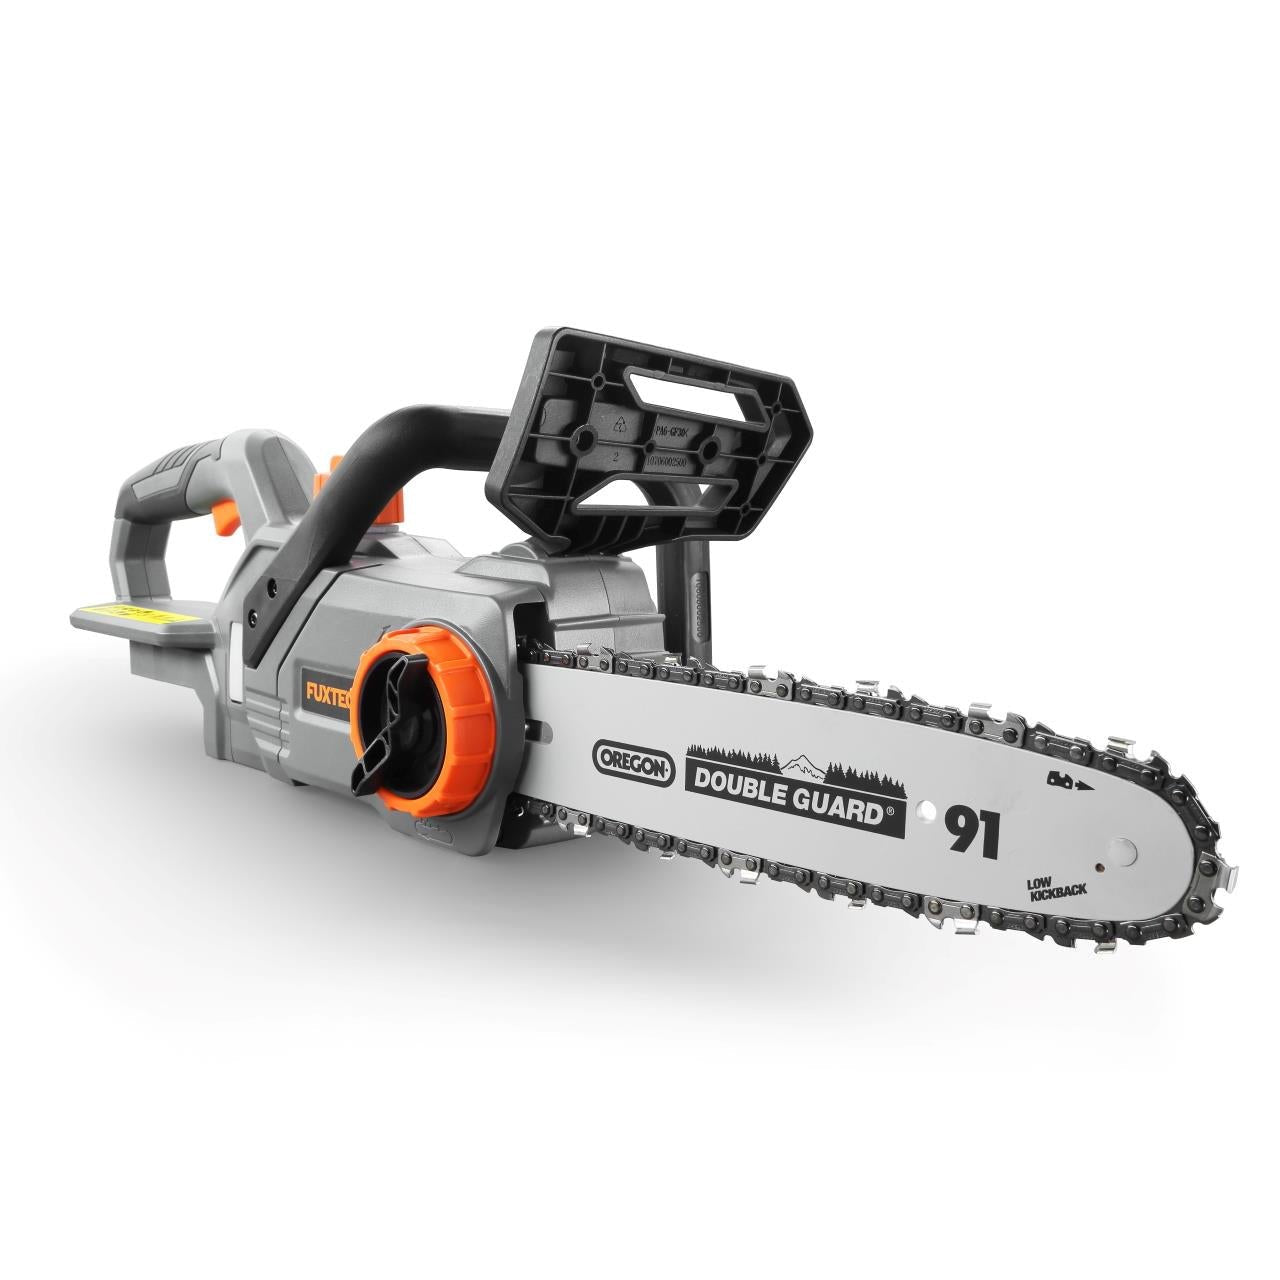 20V cordless chainsaw - Kit FUXTEC FX-E1KS20 incl. battery (2Ah) and charger (1A)